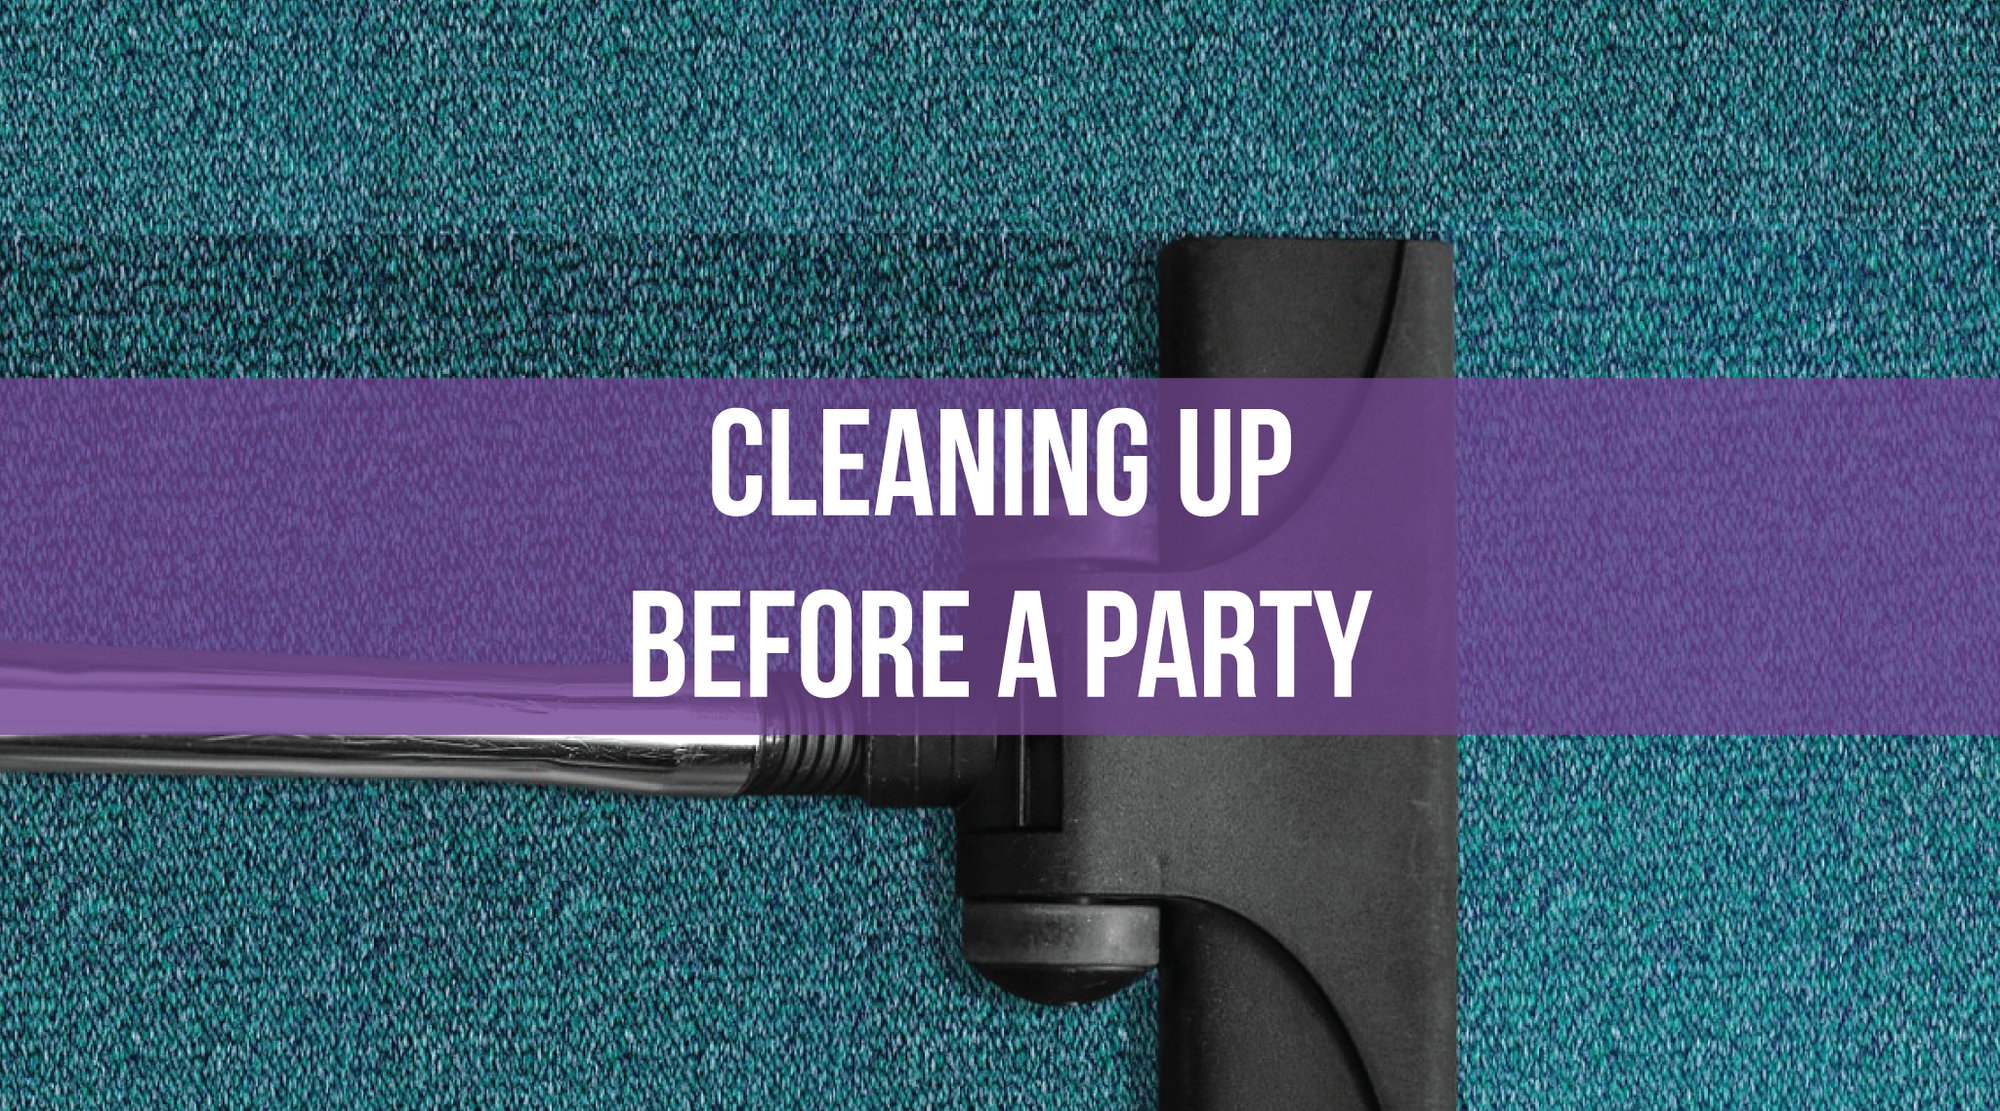 Cleaning up before a party